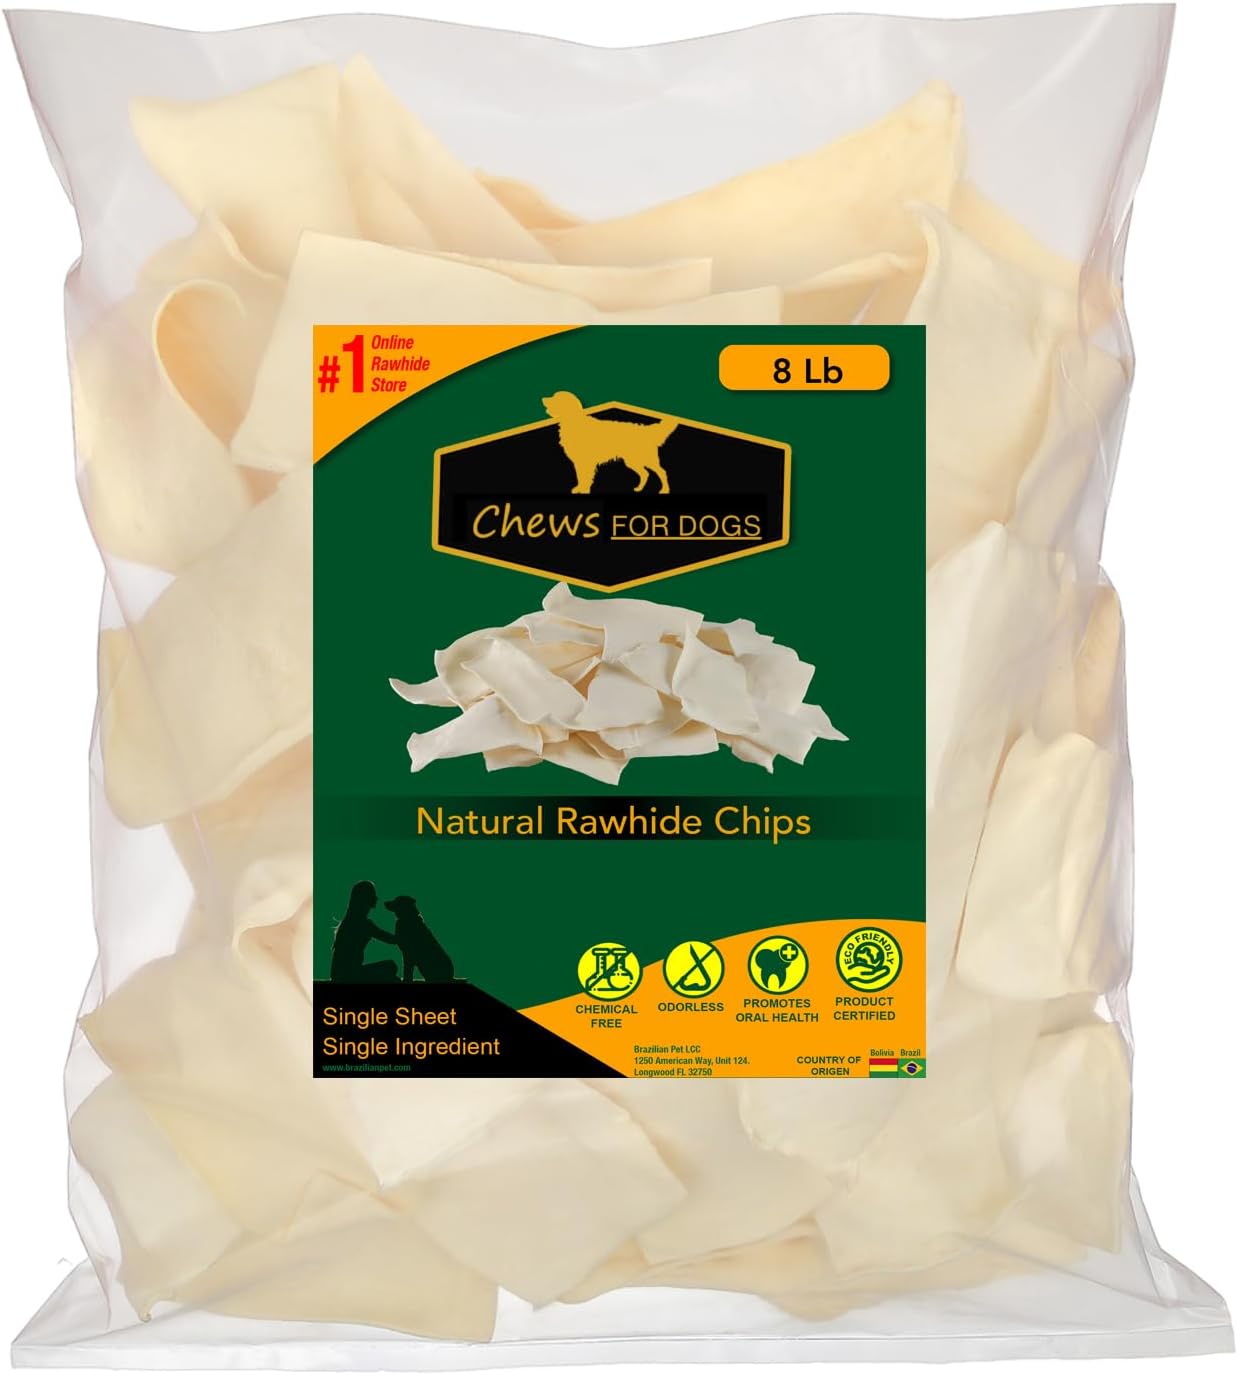 Chews for Dogs Premium Rawhide Chips – Natural Long Lasting Treats (8 Pounds)